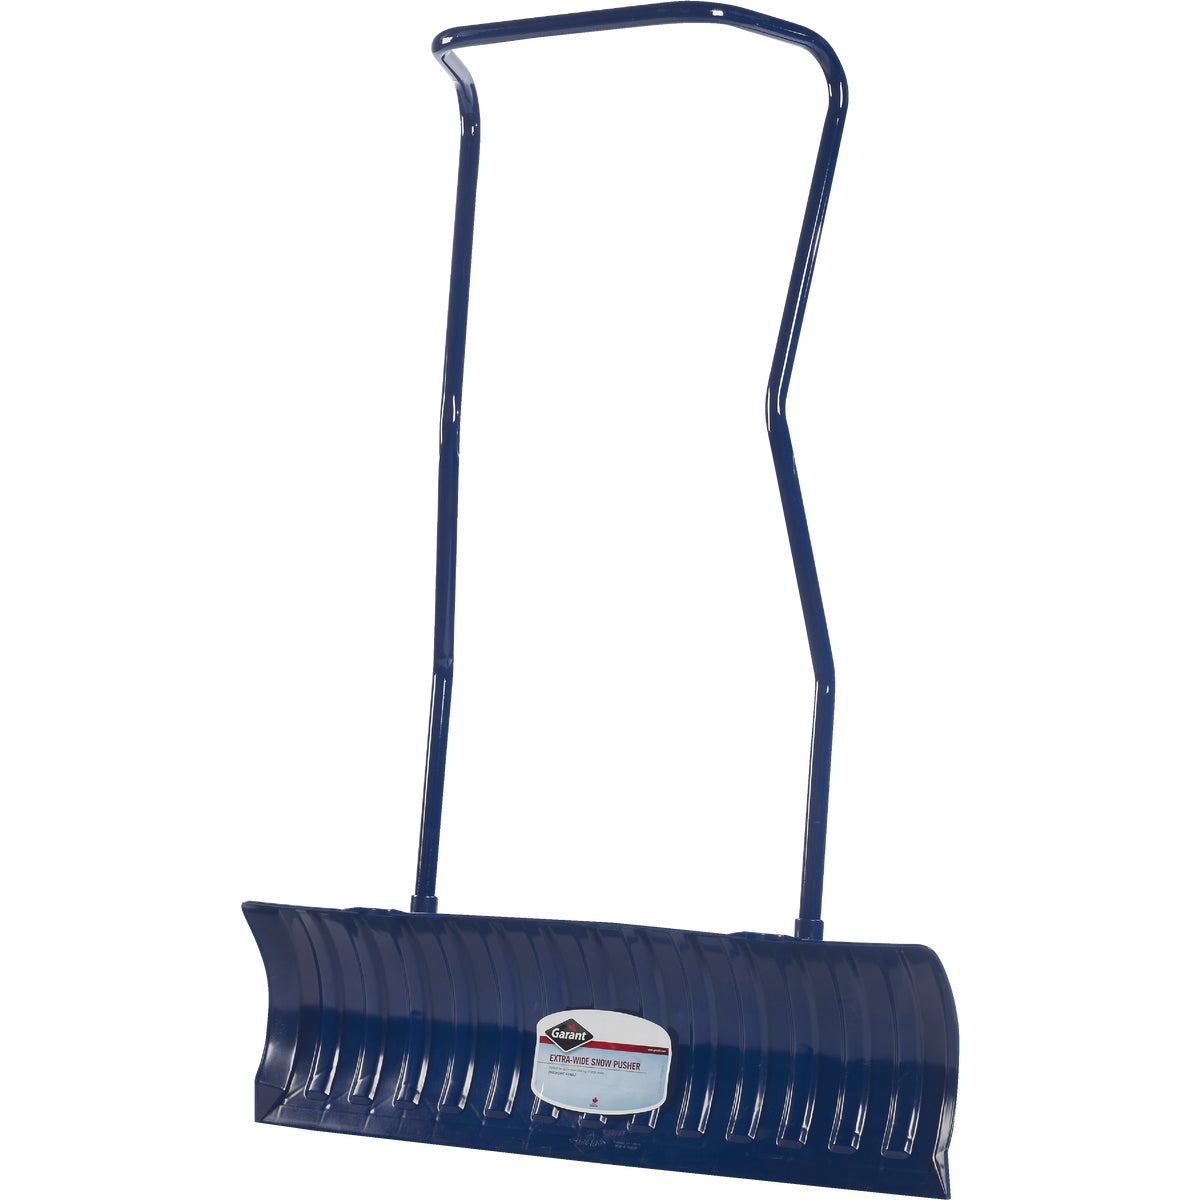 Item 739252, Yukon snow pusher has a 36 In. wide poly ribbed blue blade.